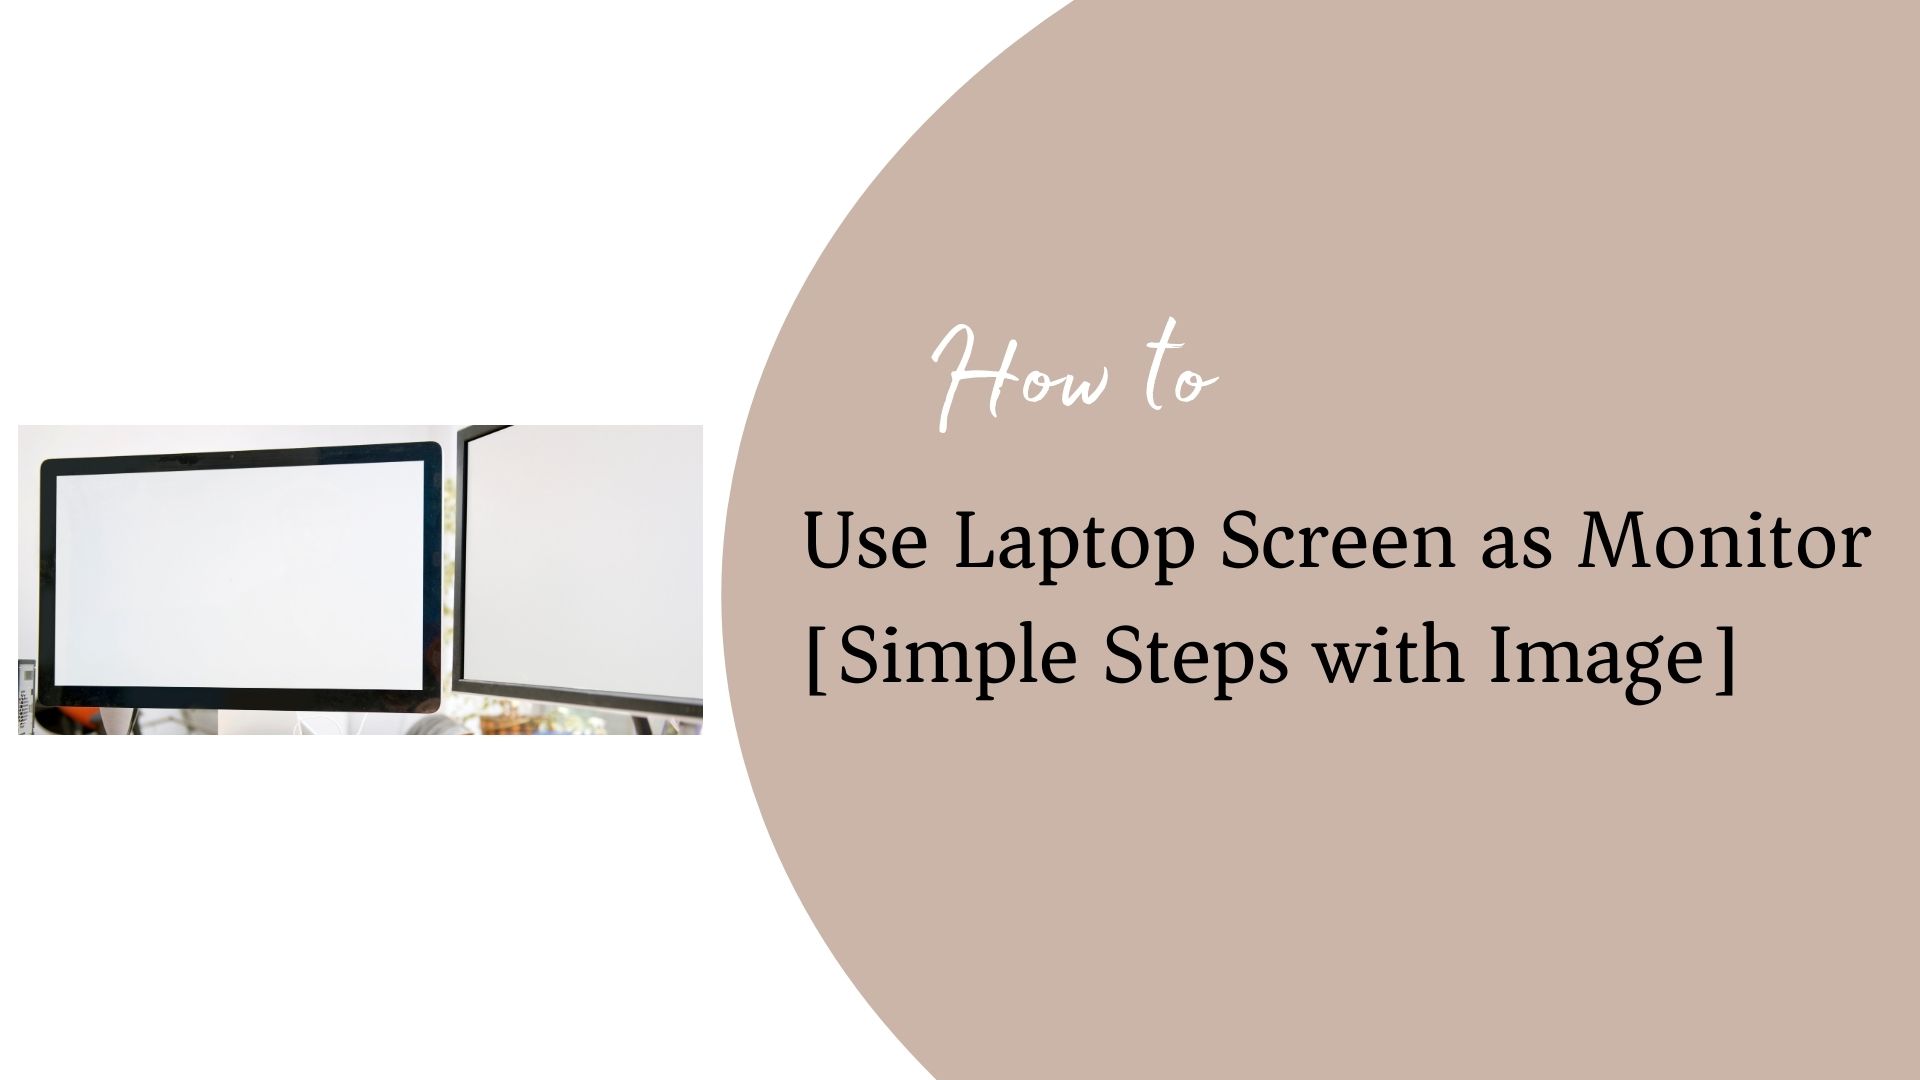 Use Laptop Screen as Monitor